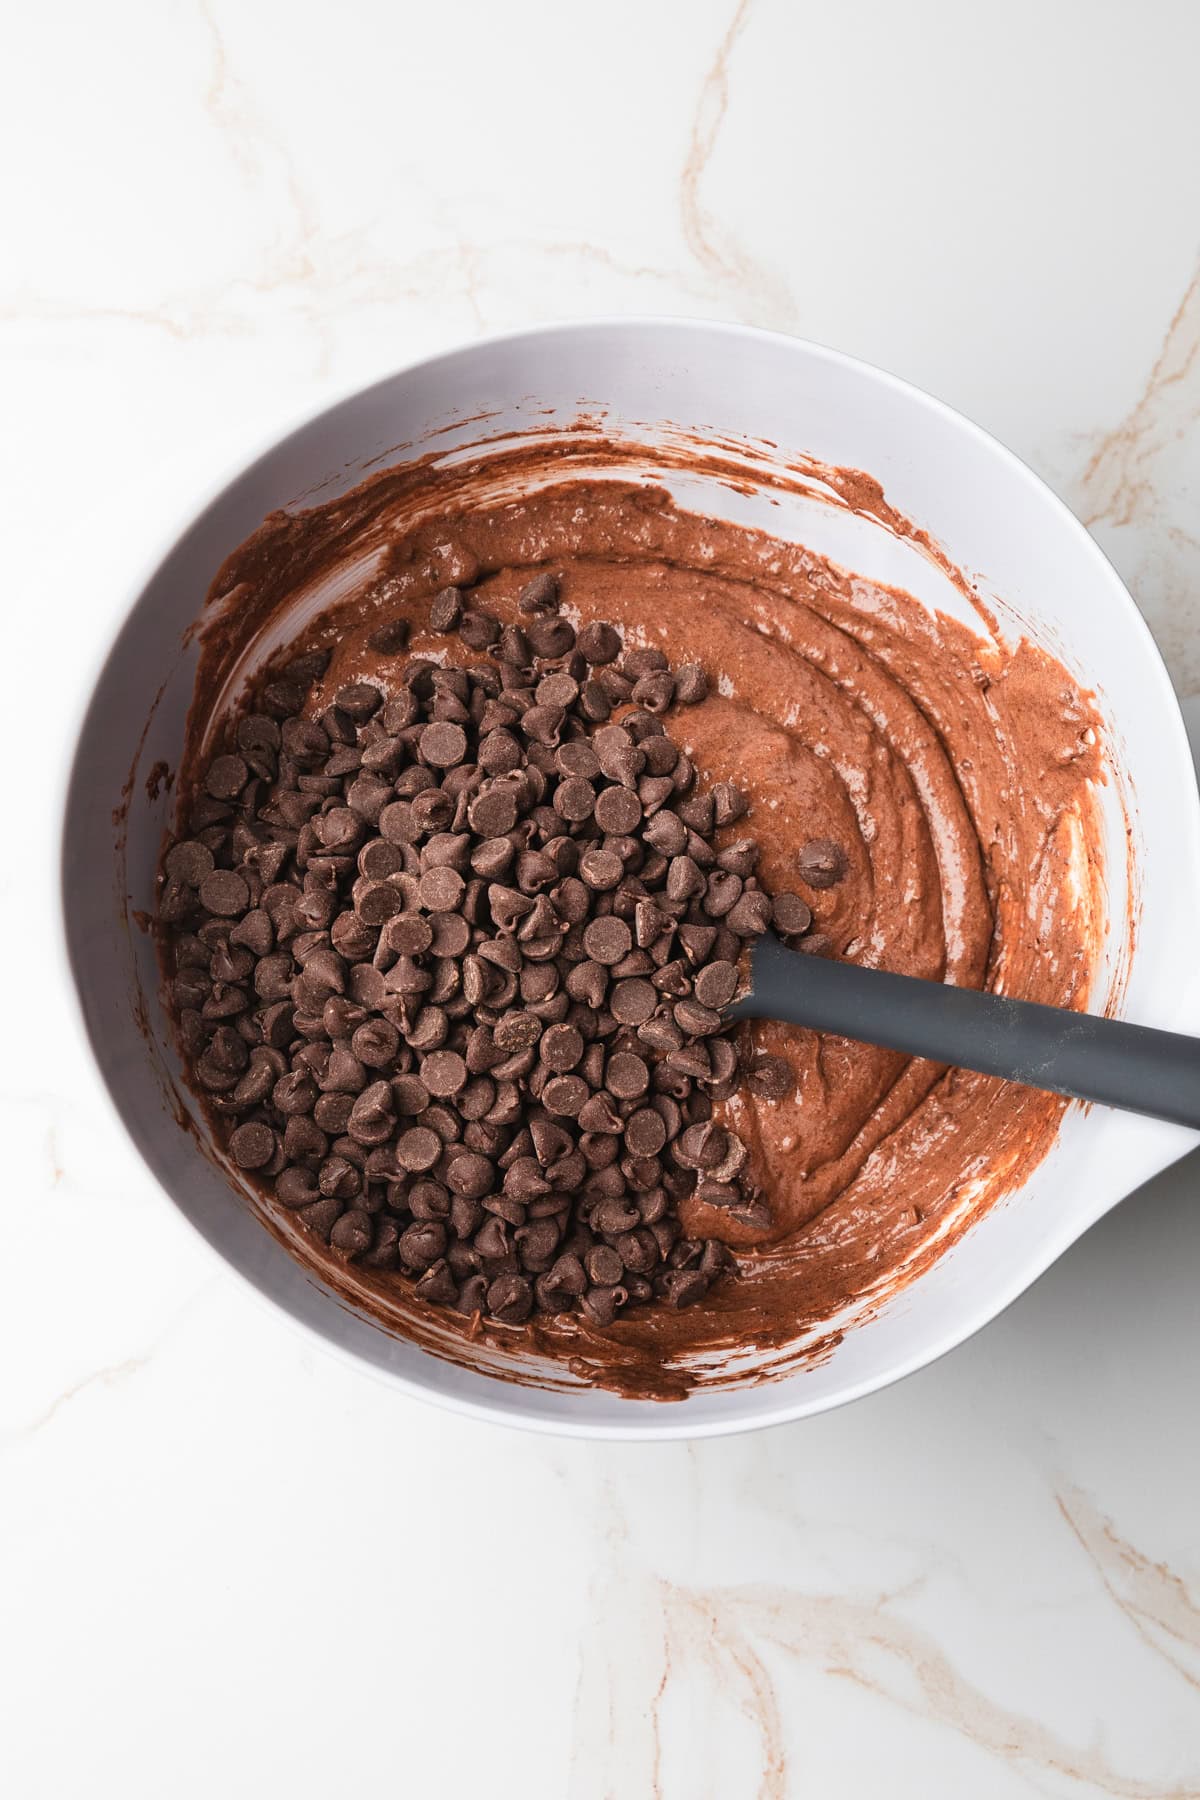 Adding chocolate chips to the cake batter.